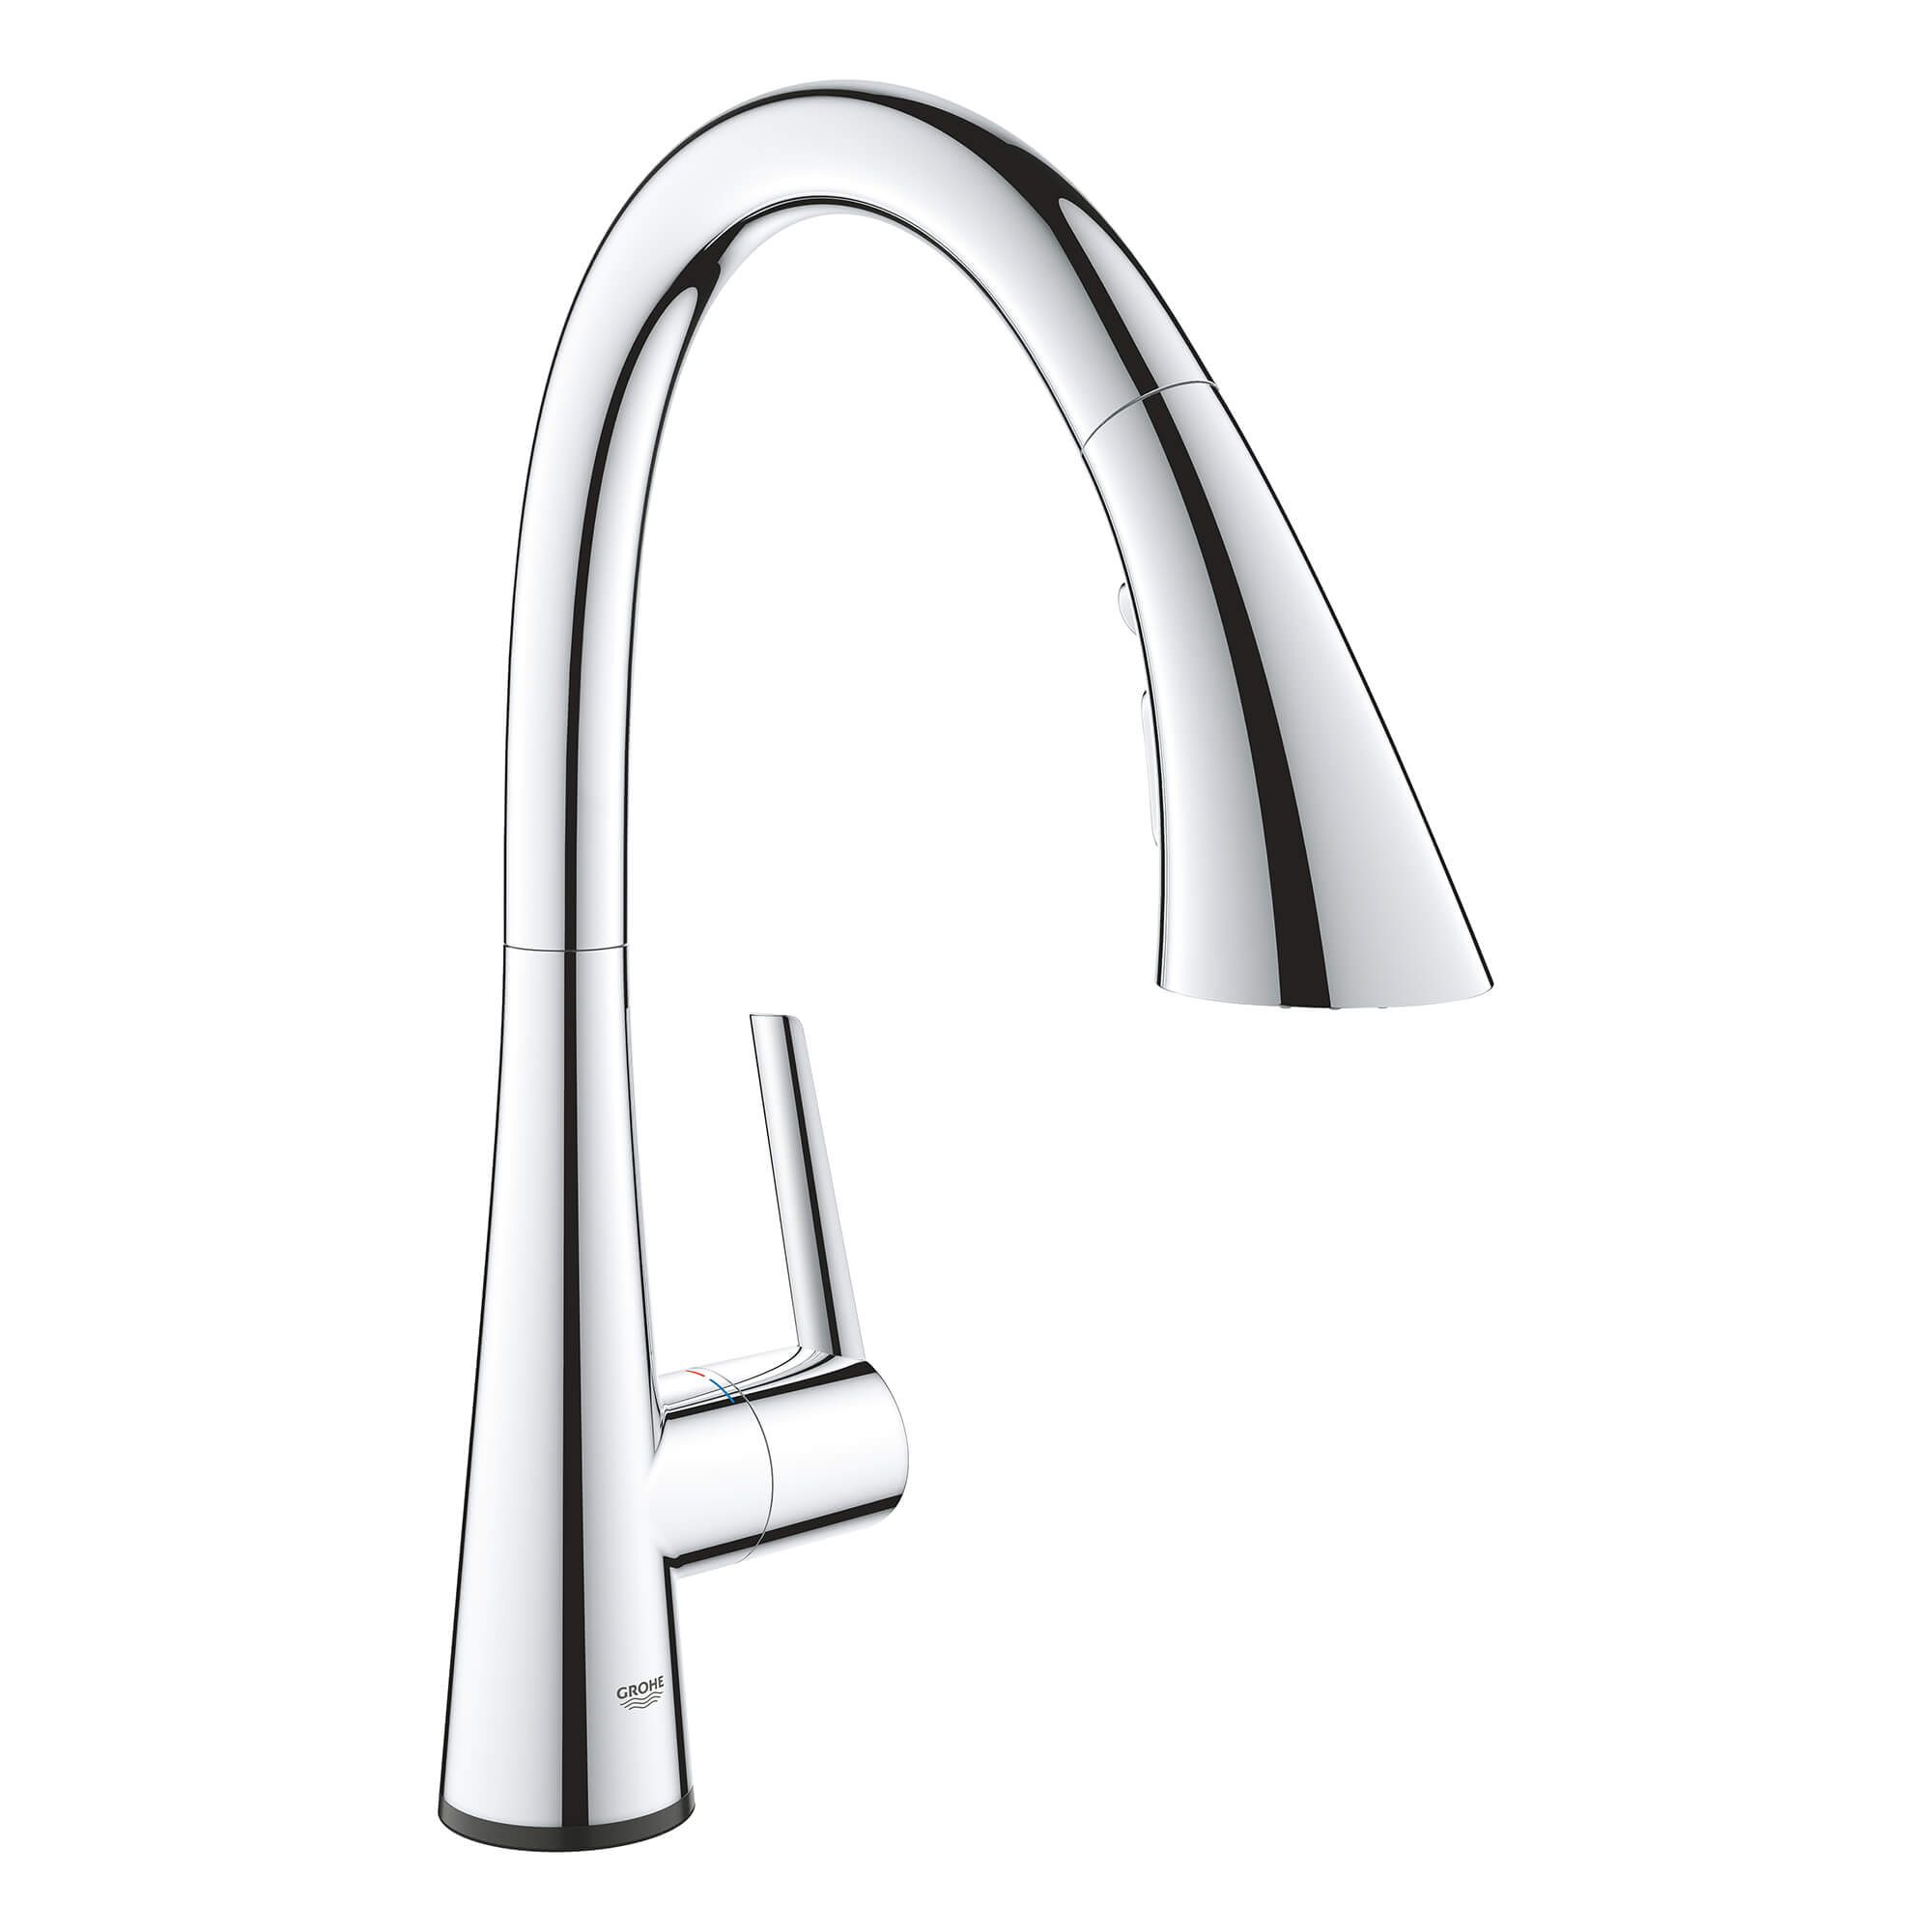 GROHE 30205 LADYLUX SINGLE-HANDLE PULL DOWN KITCHEN FAUCET TRIPLE SPRAY 1.75 GPM WITH TOUCH TECHNOLOGY